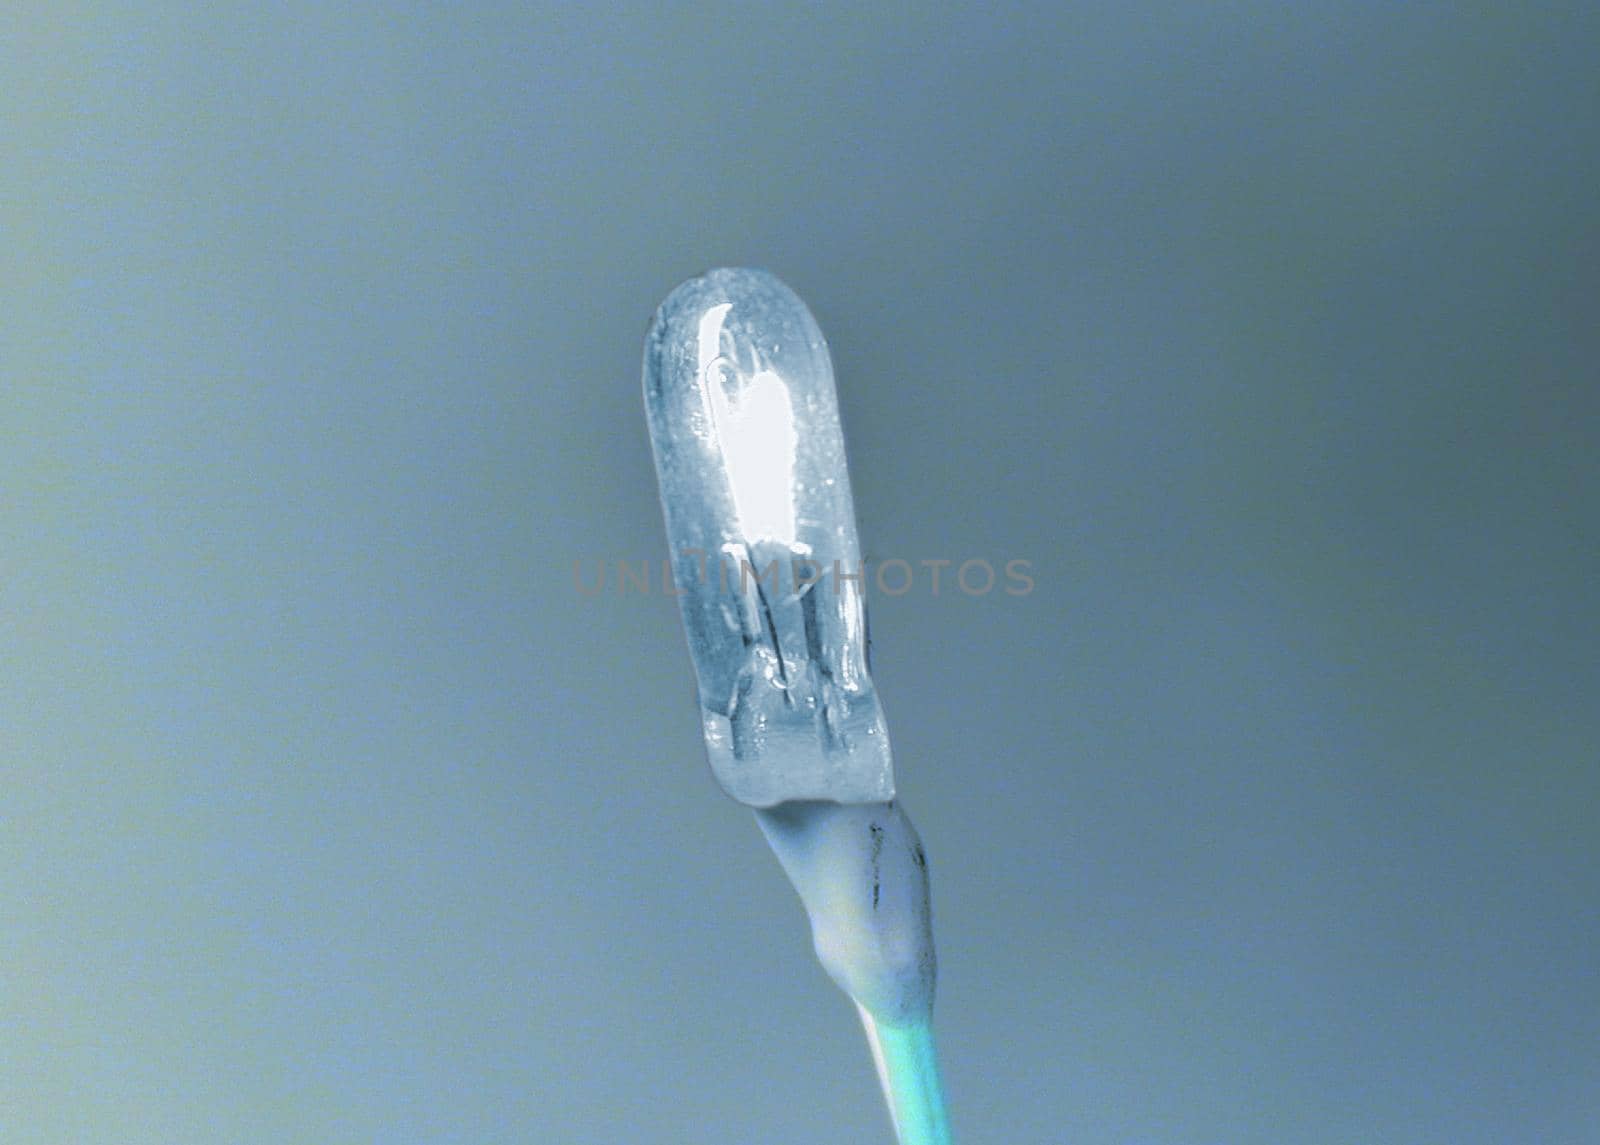 Glowing grain of wheat led lamp bulb detail close-up image on grey background